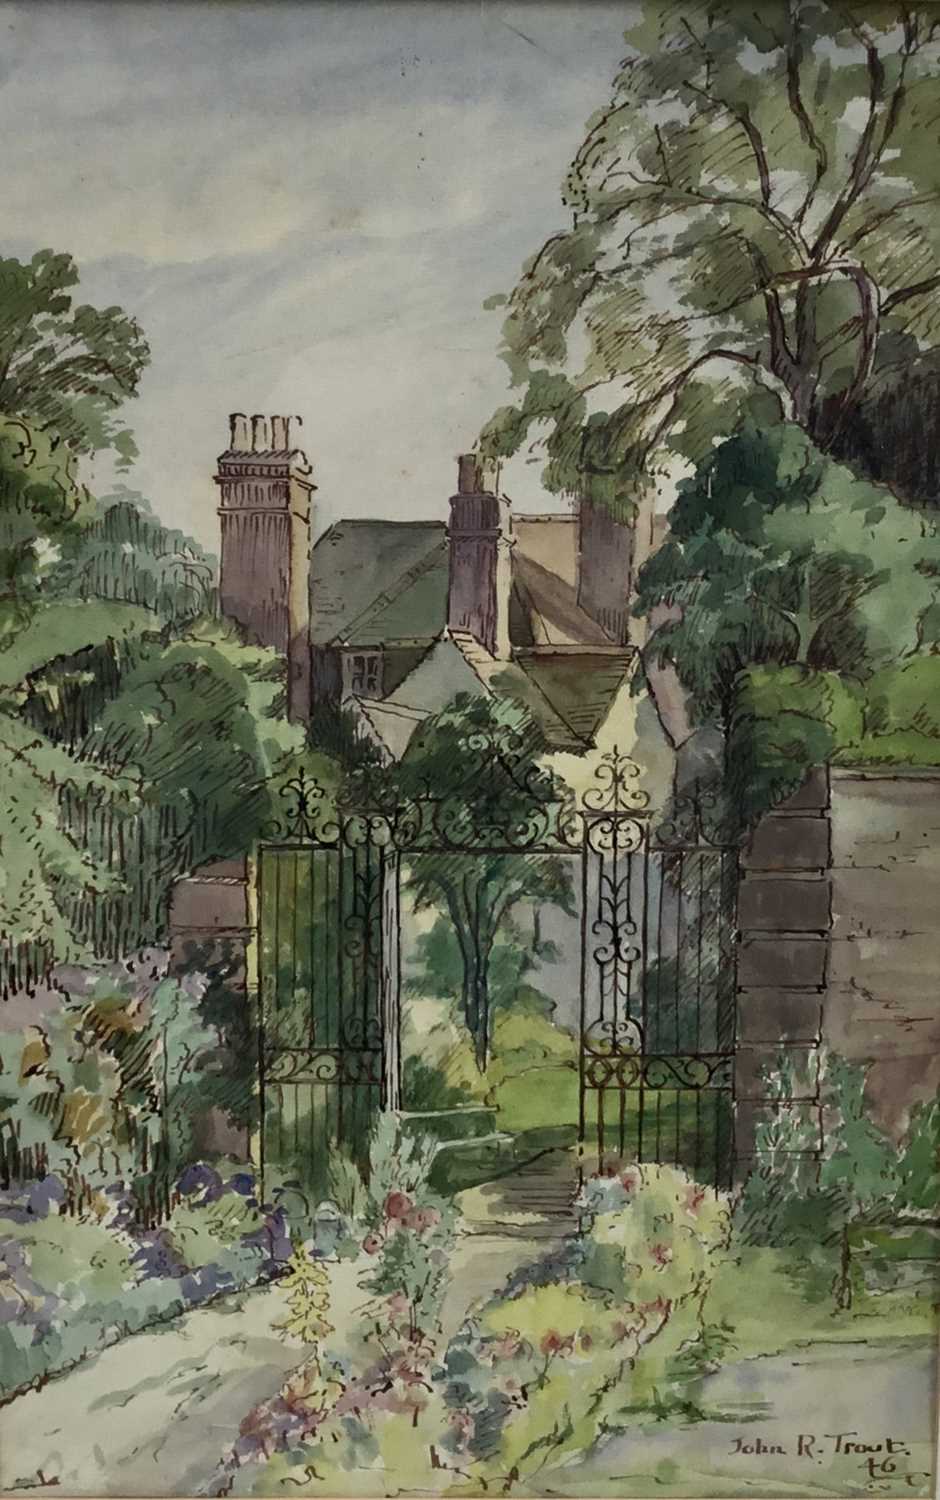 Lot 108 - John R. Trout, watercolour - The Garden, Wentworth House, Braintree, signed and dated '46, 46cm x 29cm, in glazed gilt frame